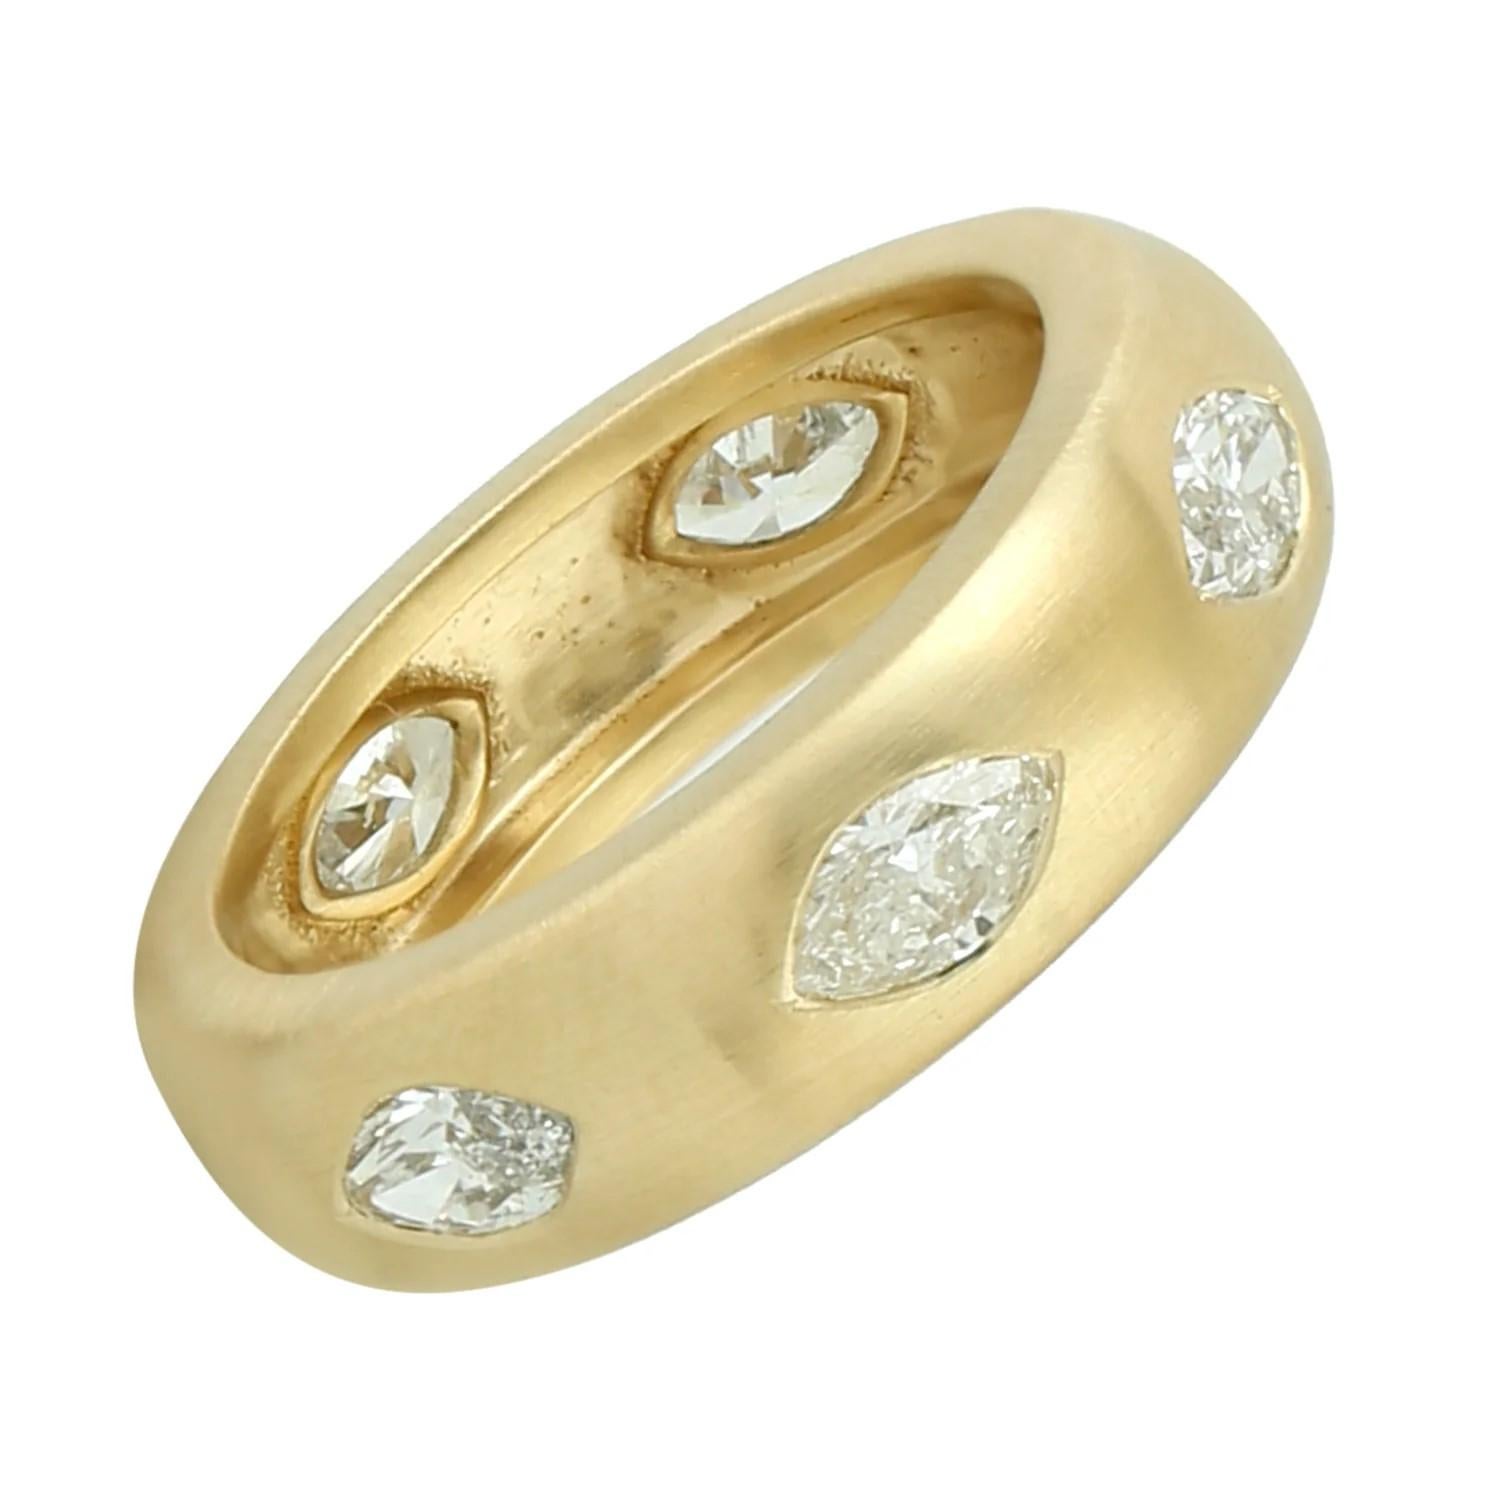 This ring has been meticulously crafted from 14-karat gold.  It is hand set with 1.79 carats of sparkling diamonds. 

The ring is a size 7 and may be resized to larger or smaller upon request. 
FOLLOW  MEGHNA JEWELS storefront to view the latest